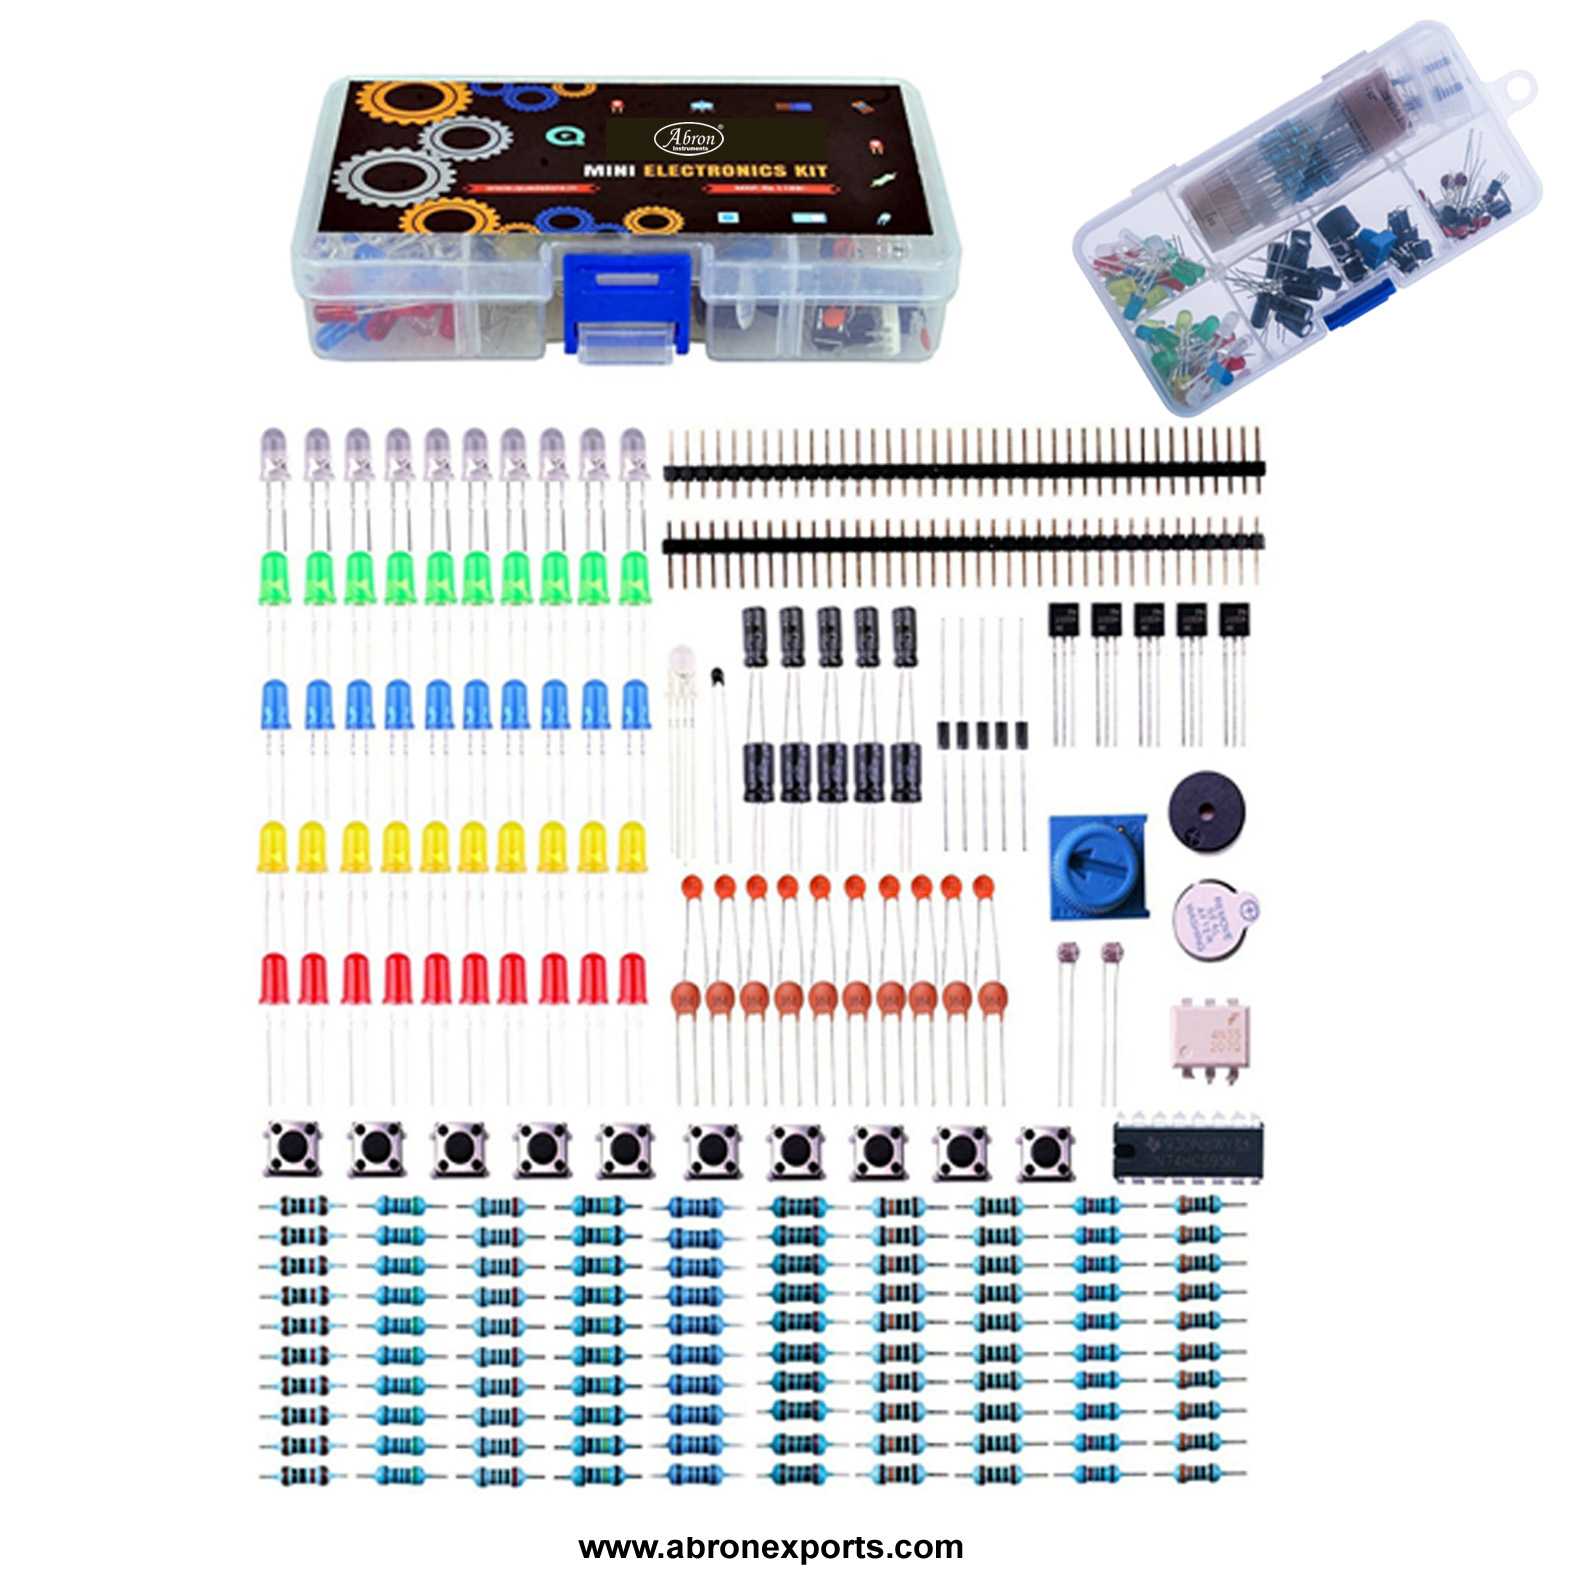 Components kit project with buzzer button leds potentiometer resistor capacitor abron AE-1224-kz